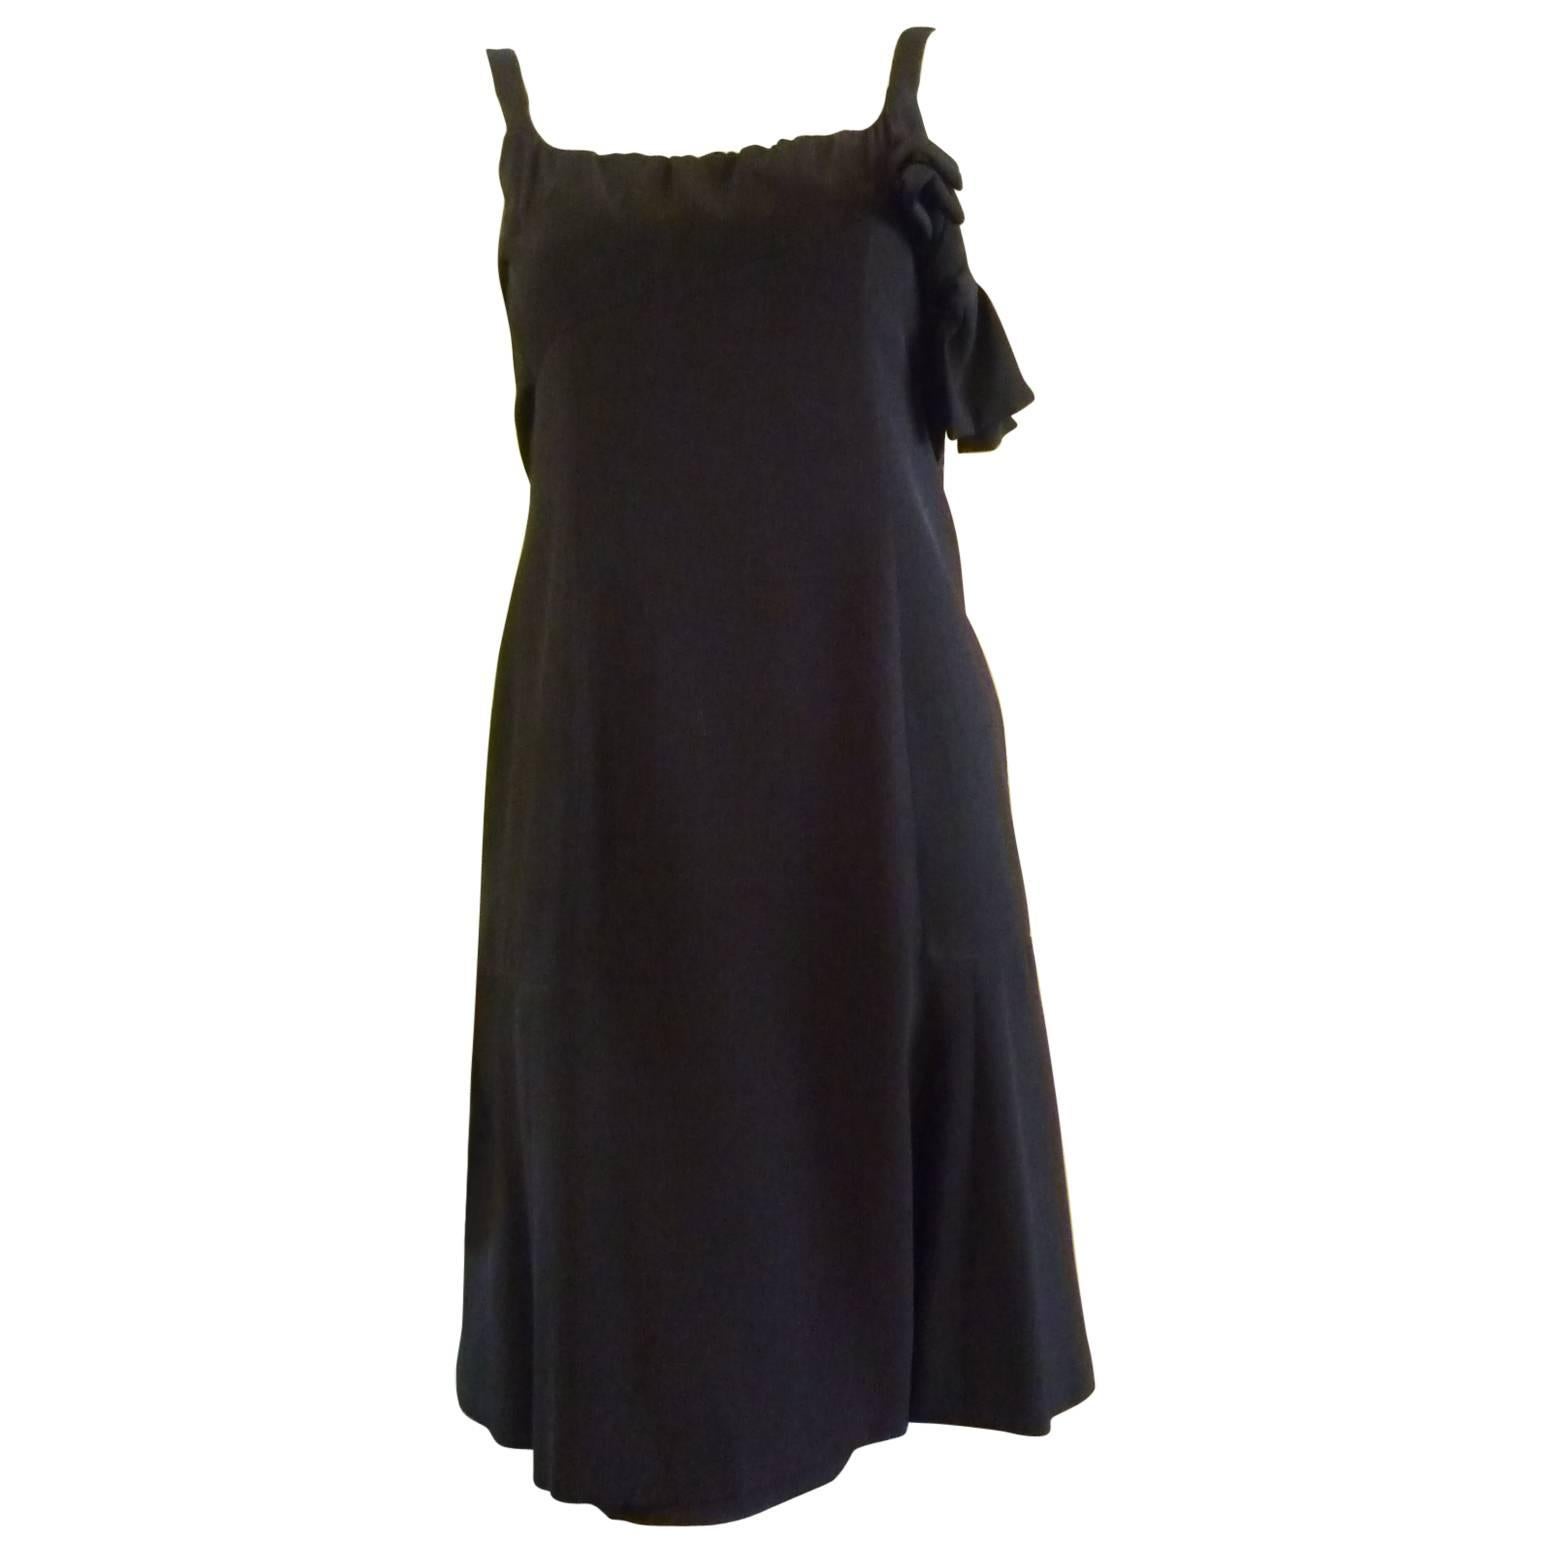 Very Special 1950s Jacques Heim Attributed Black Cocktail Dress with Low Back(S)